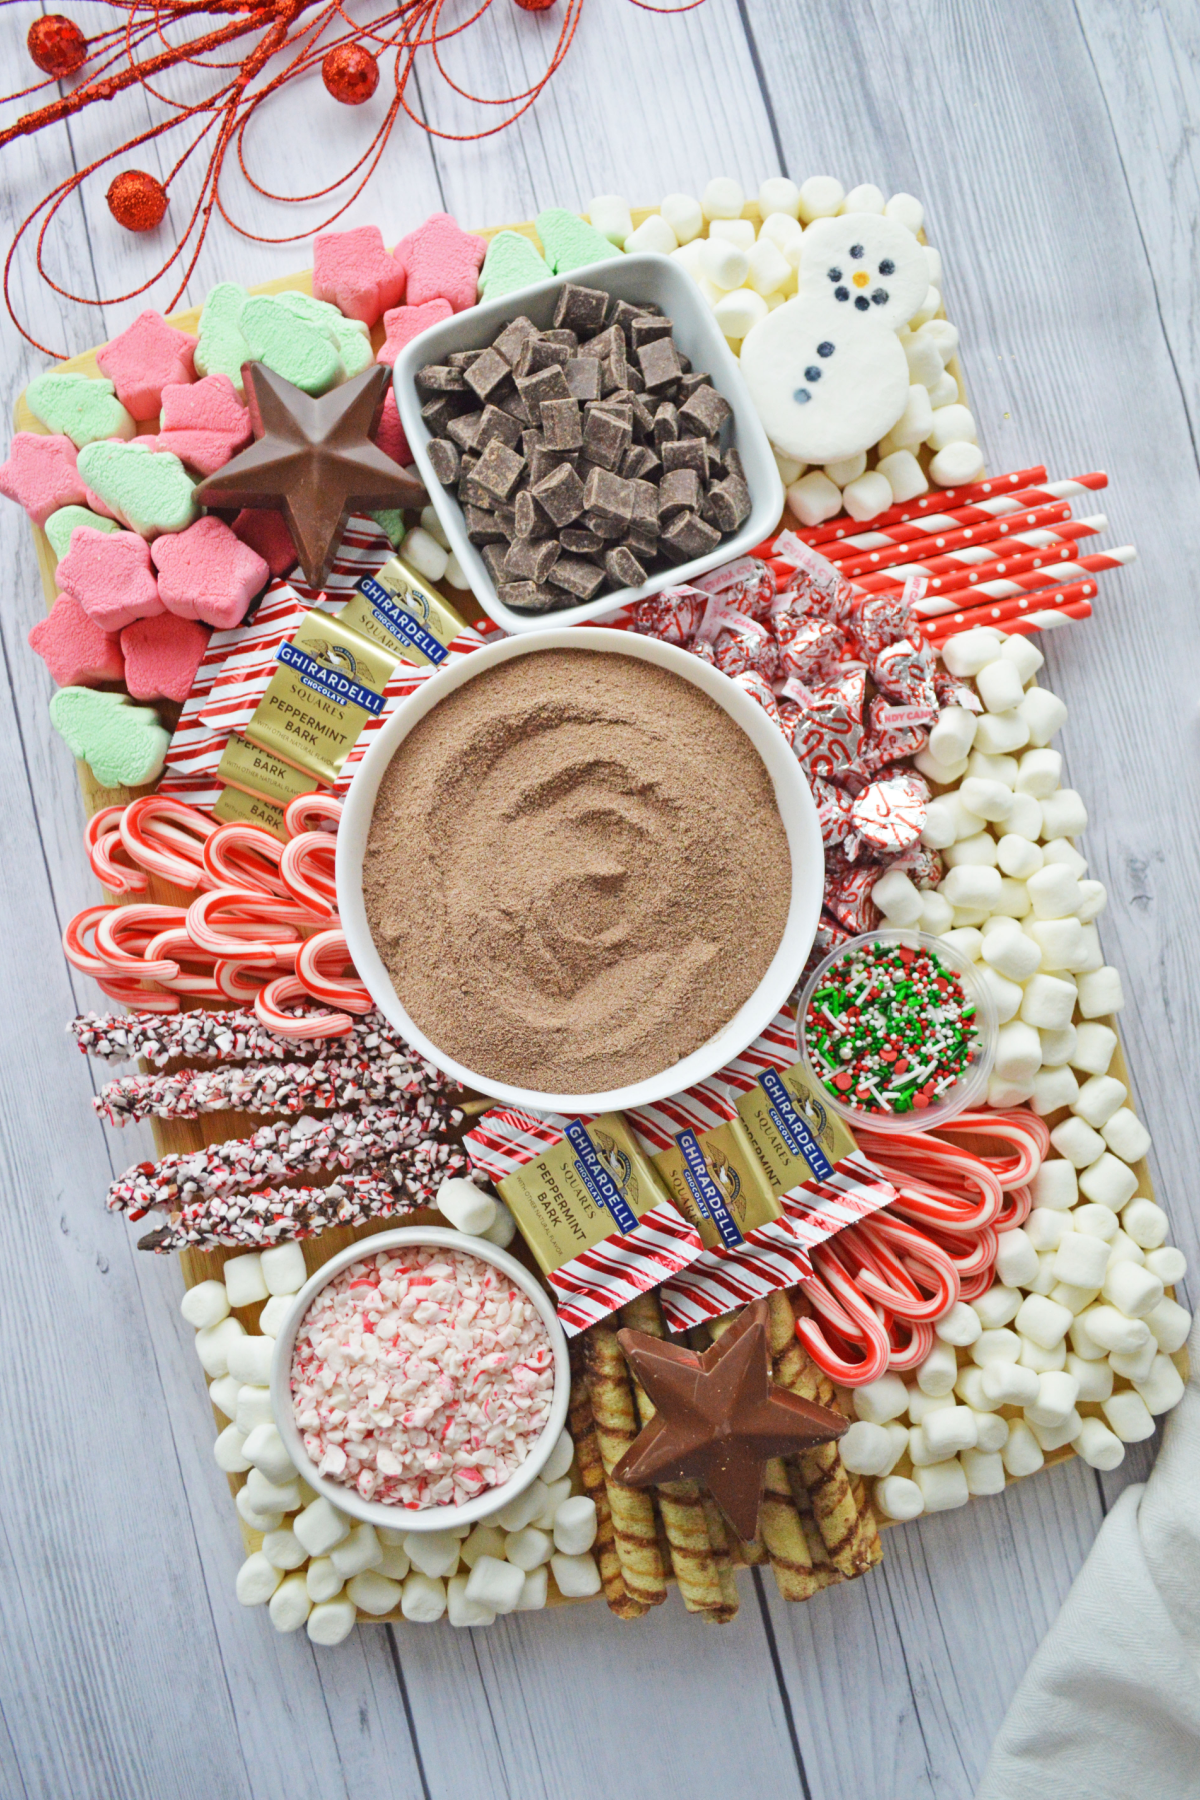 Hot Chocolate Charcuterie Board from above